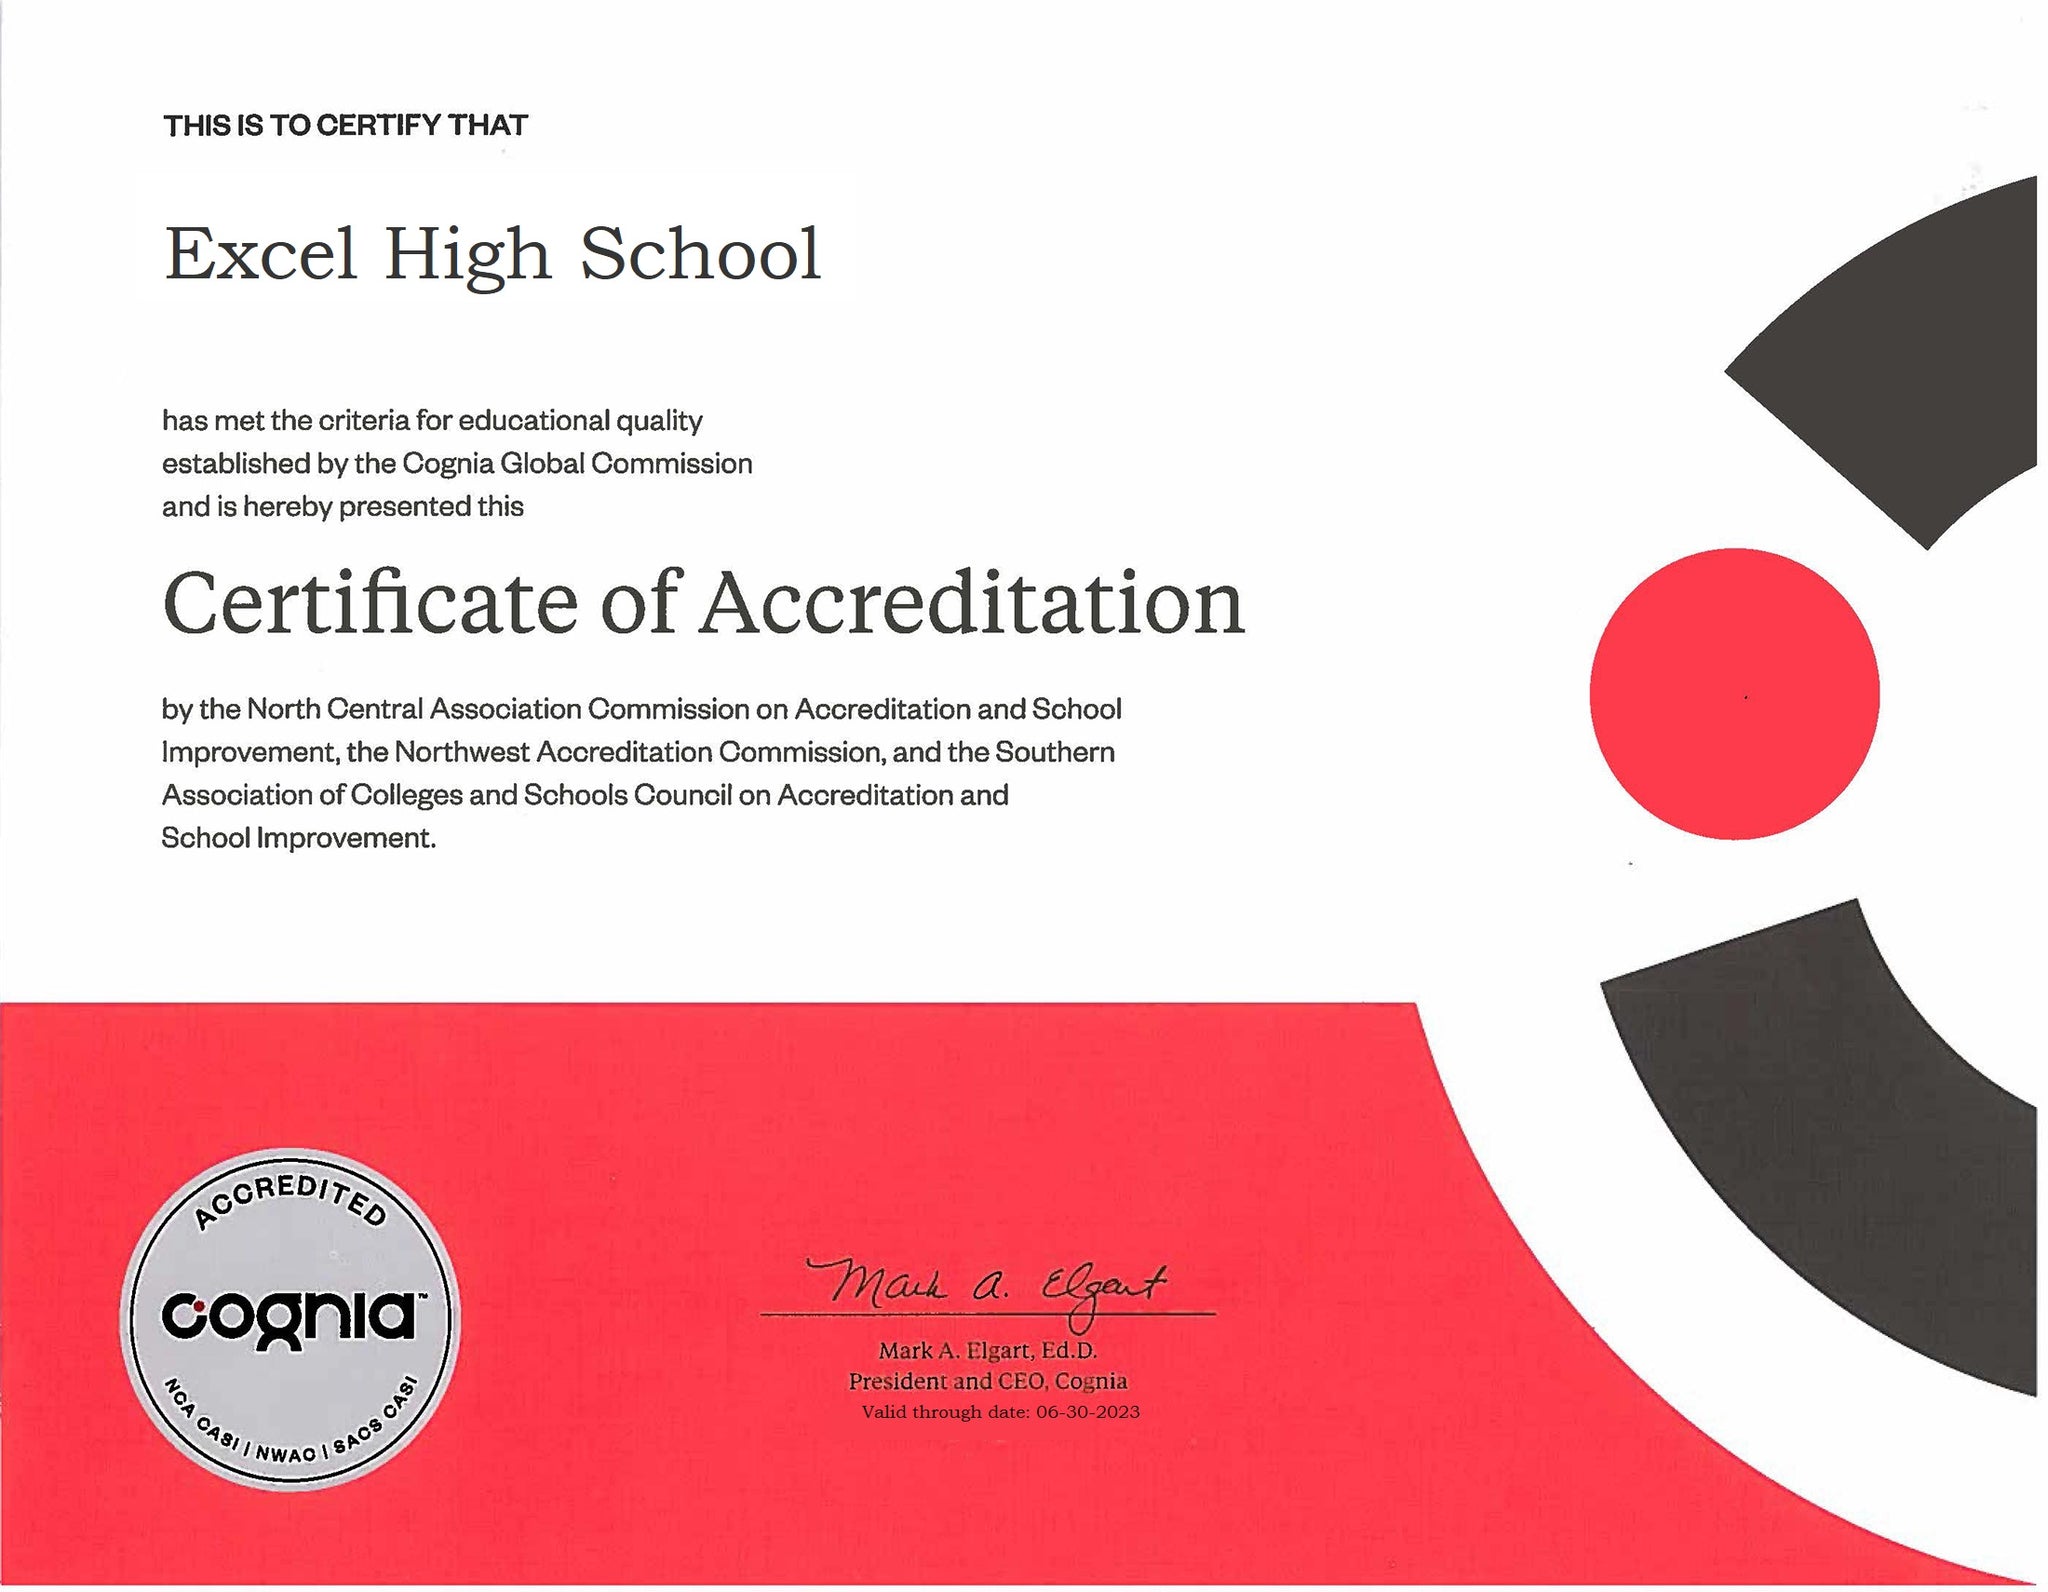 Is Excel High School Accredited?